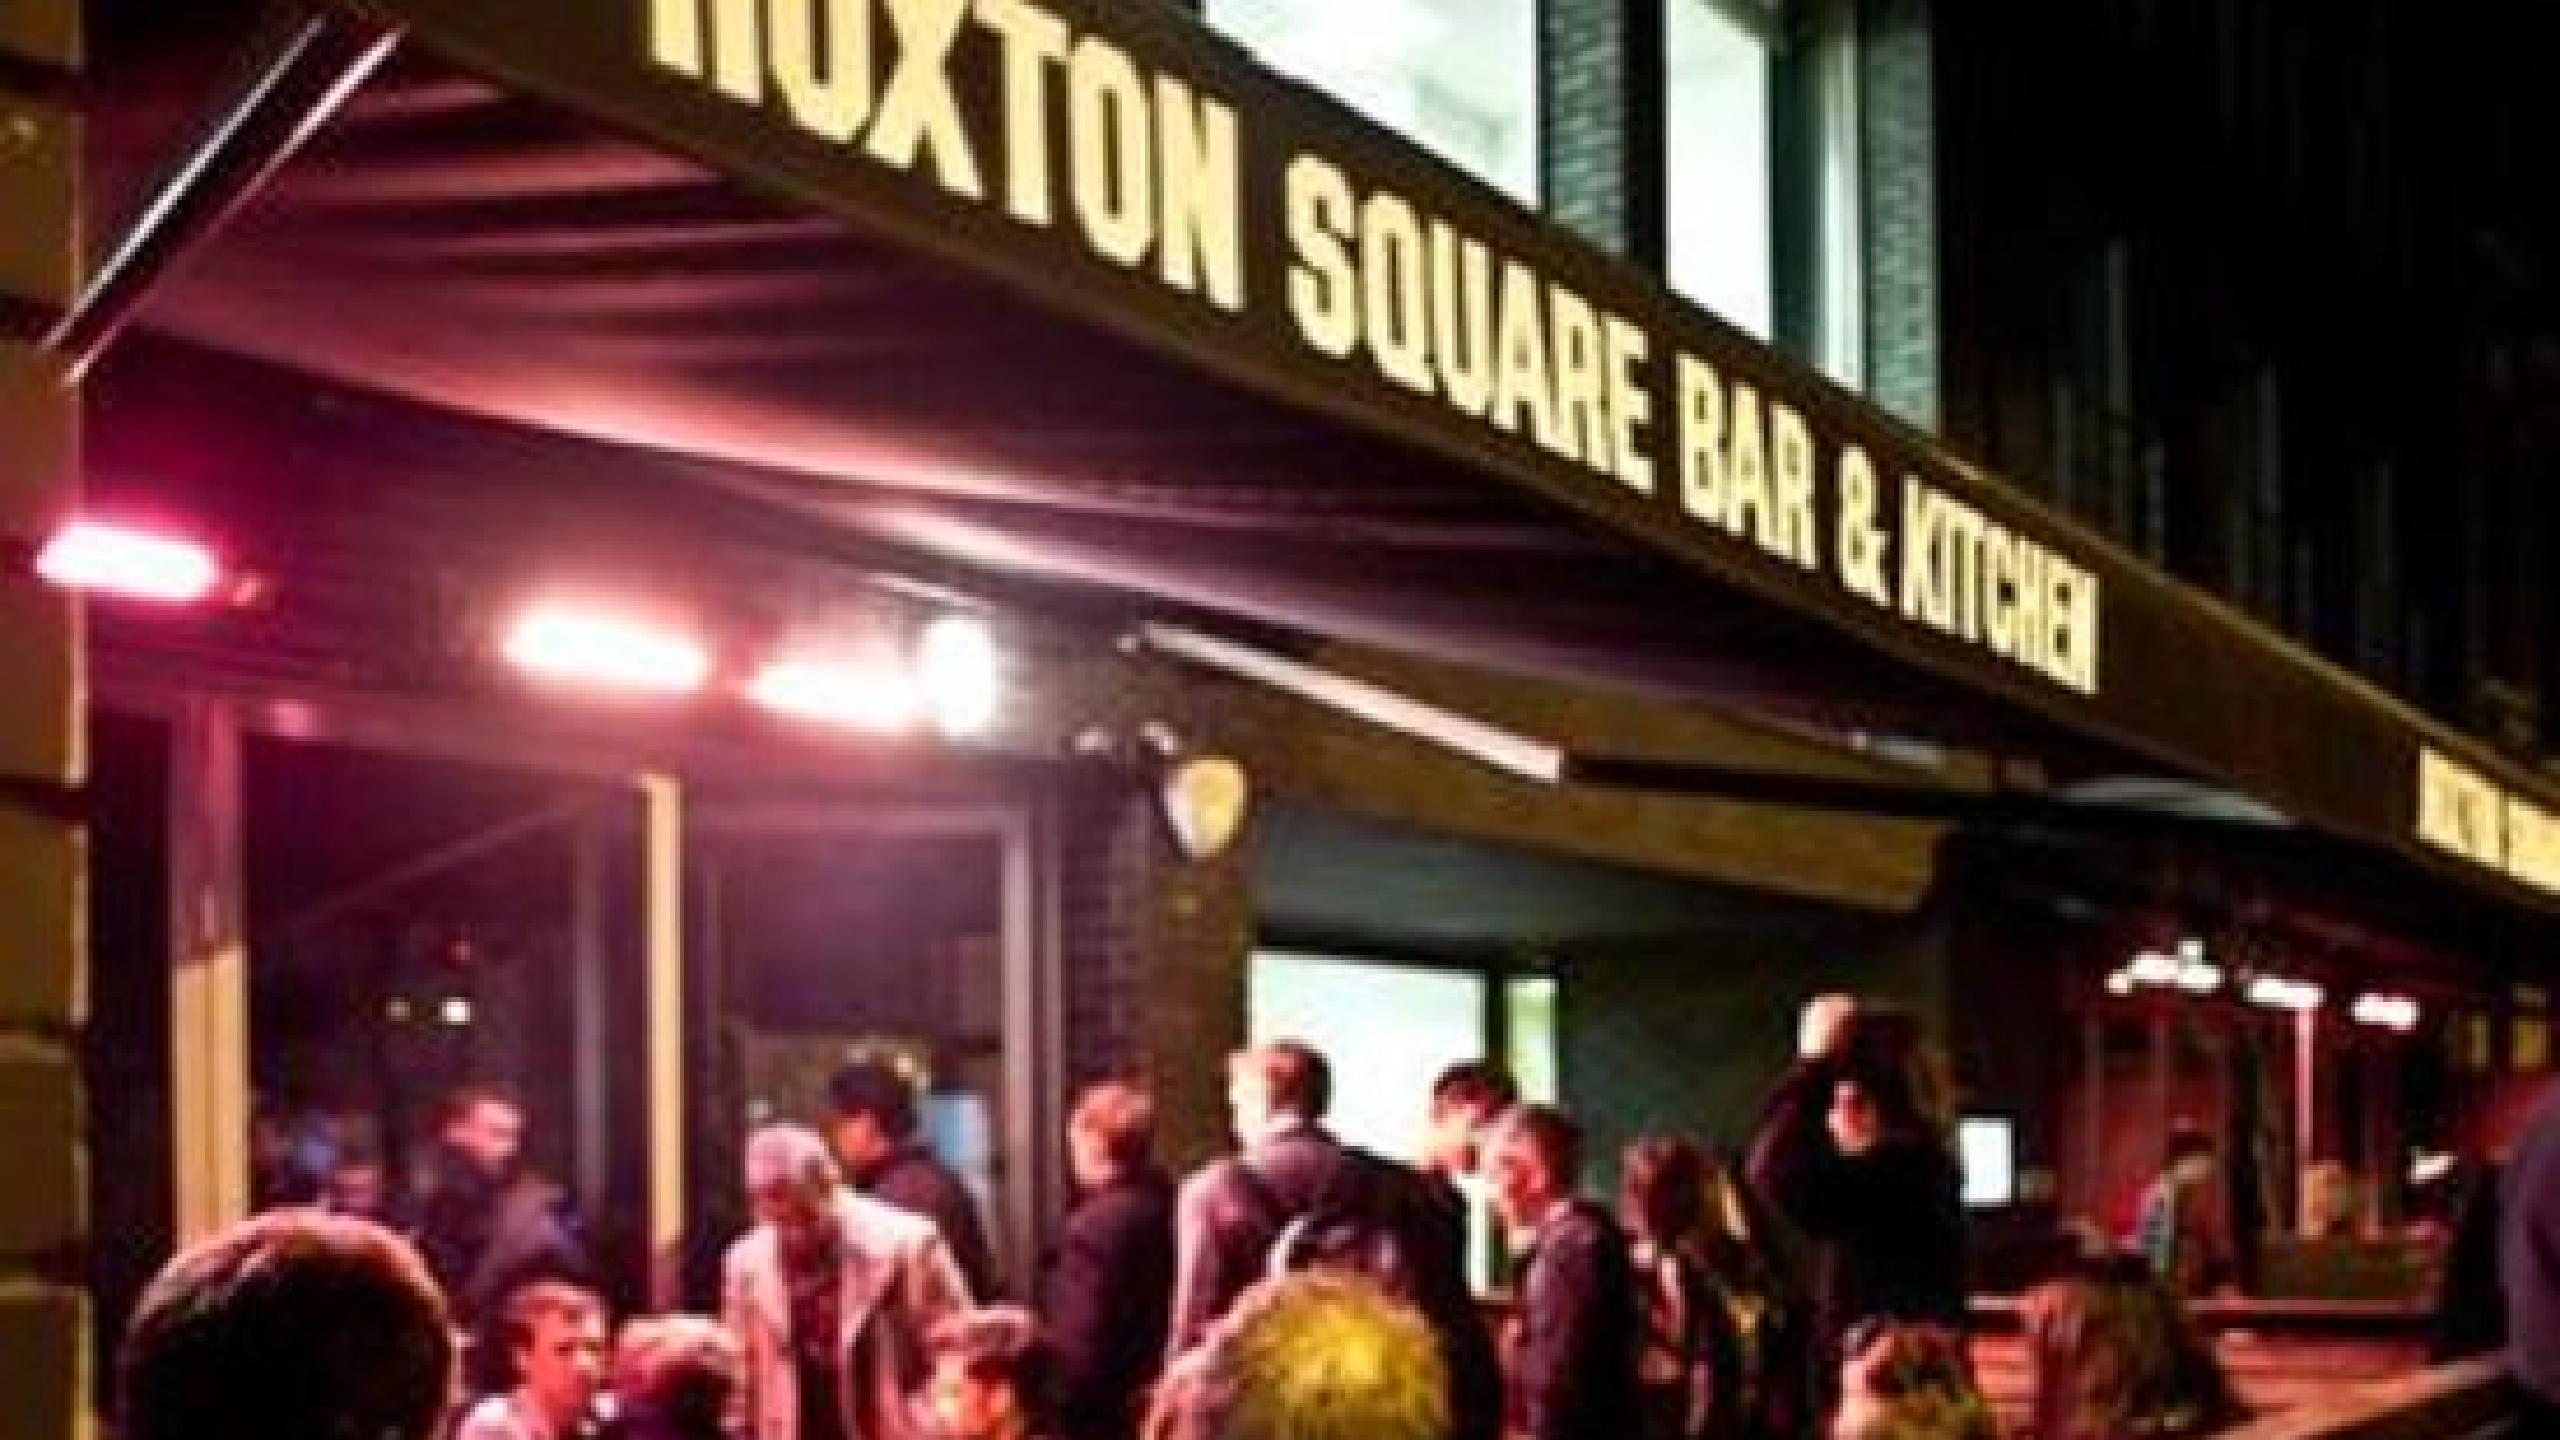 hoxton square bar and kitchen happy hour